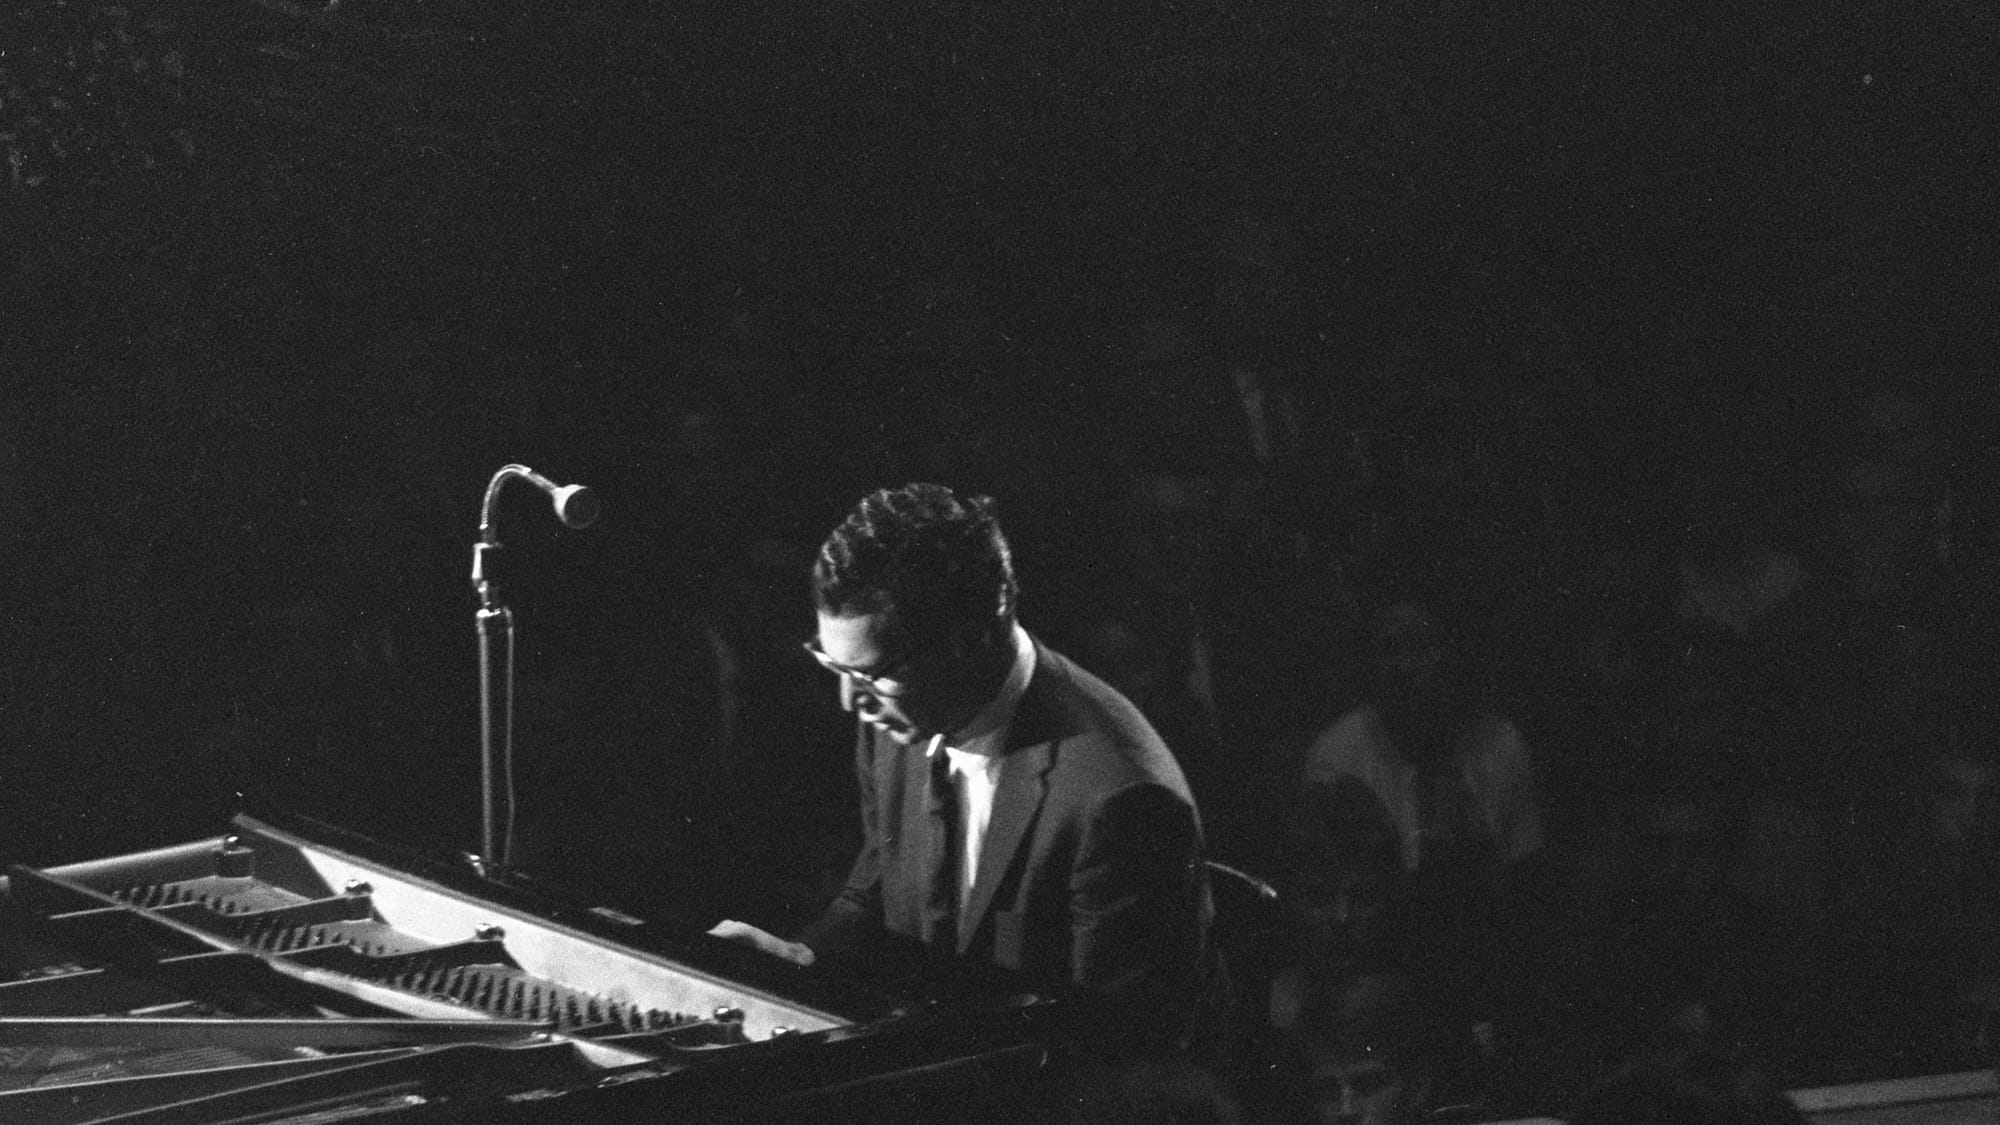 Black and white image of Dave Brubeck seated at the piano in near-darkness, in concert in 1959